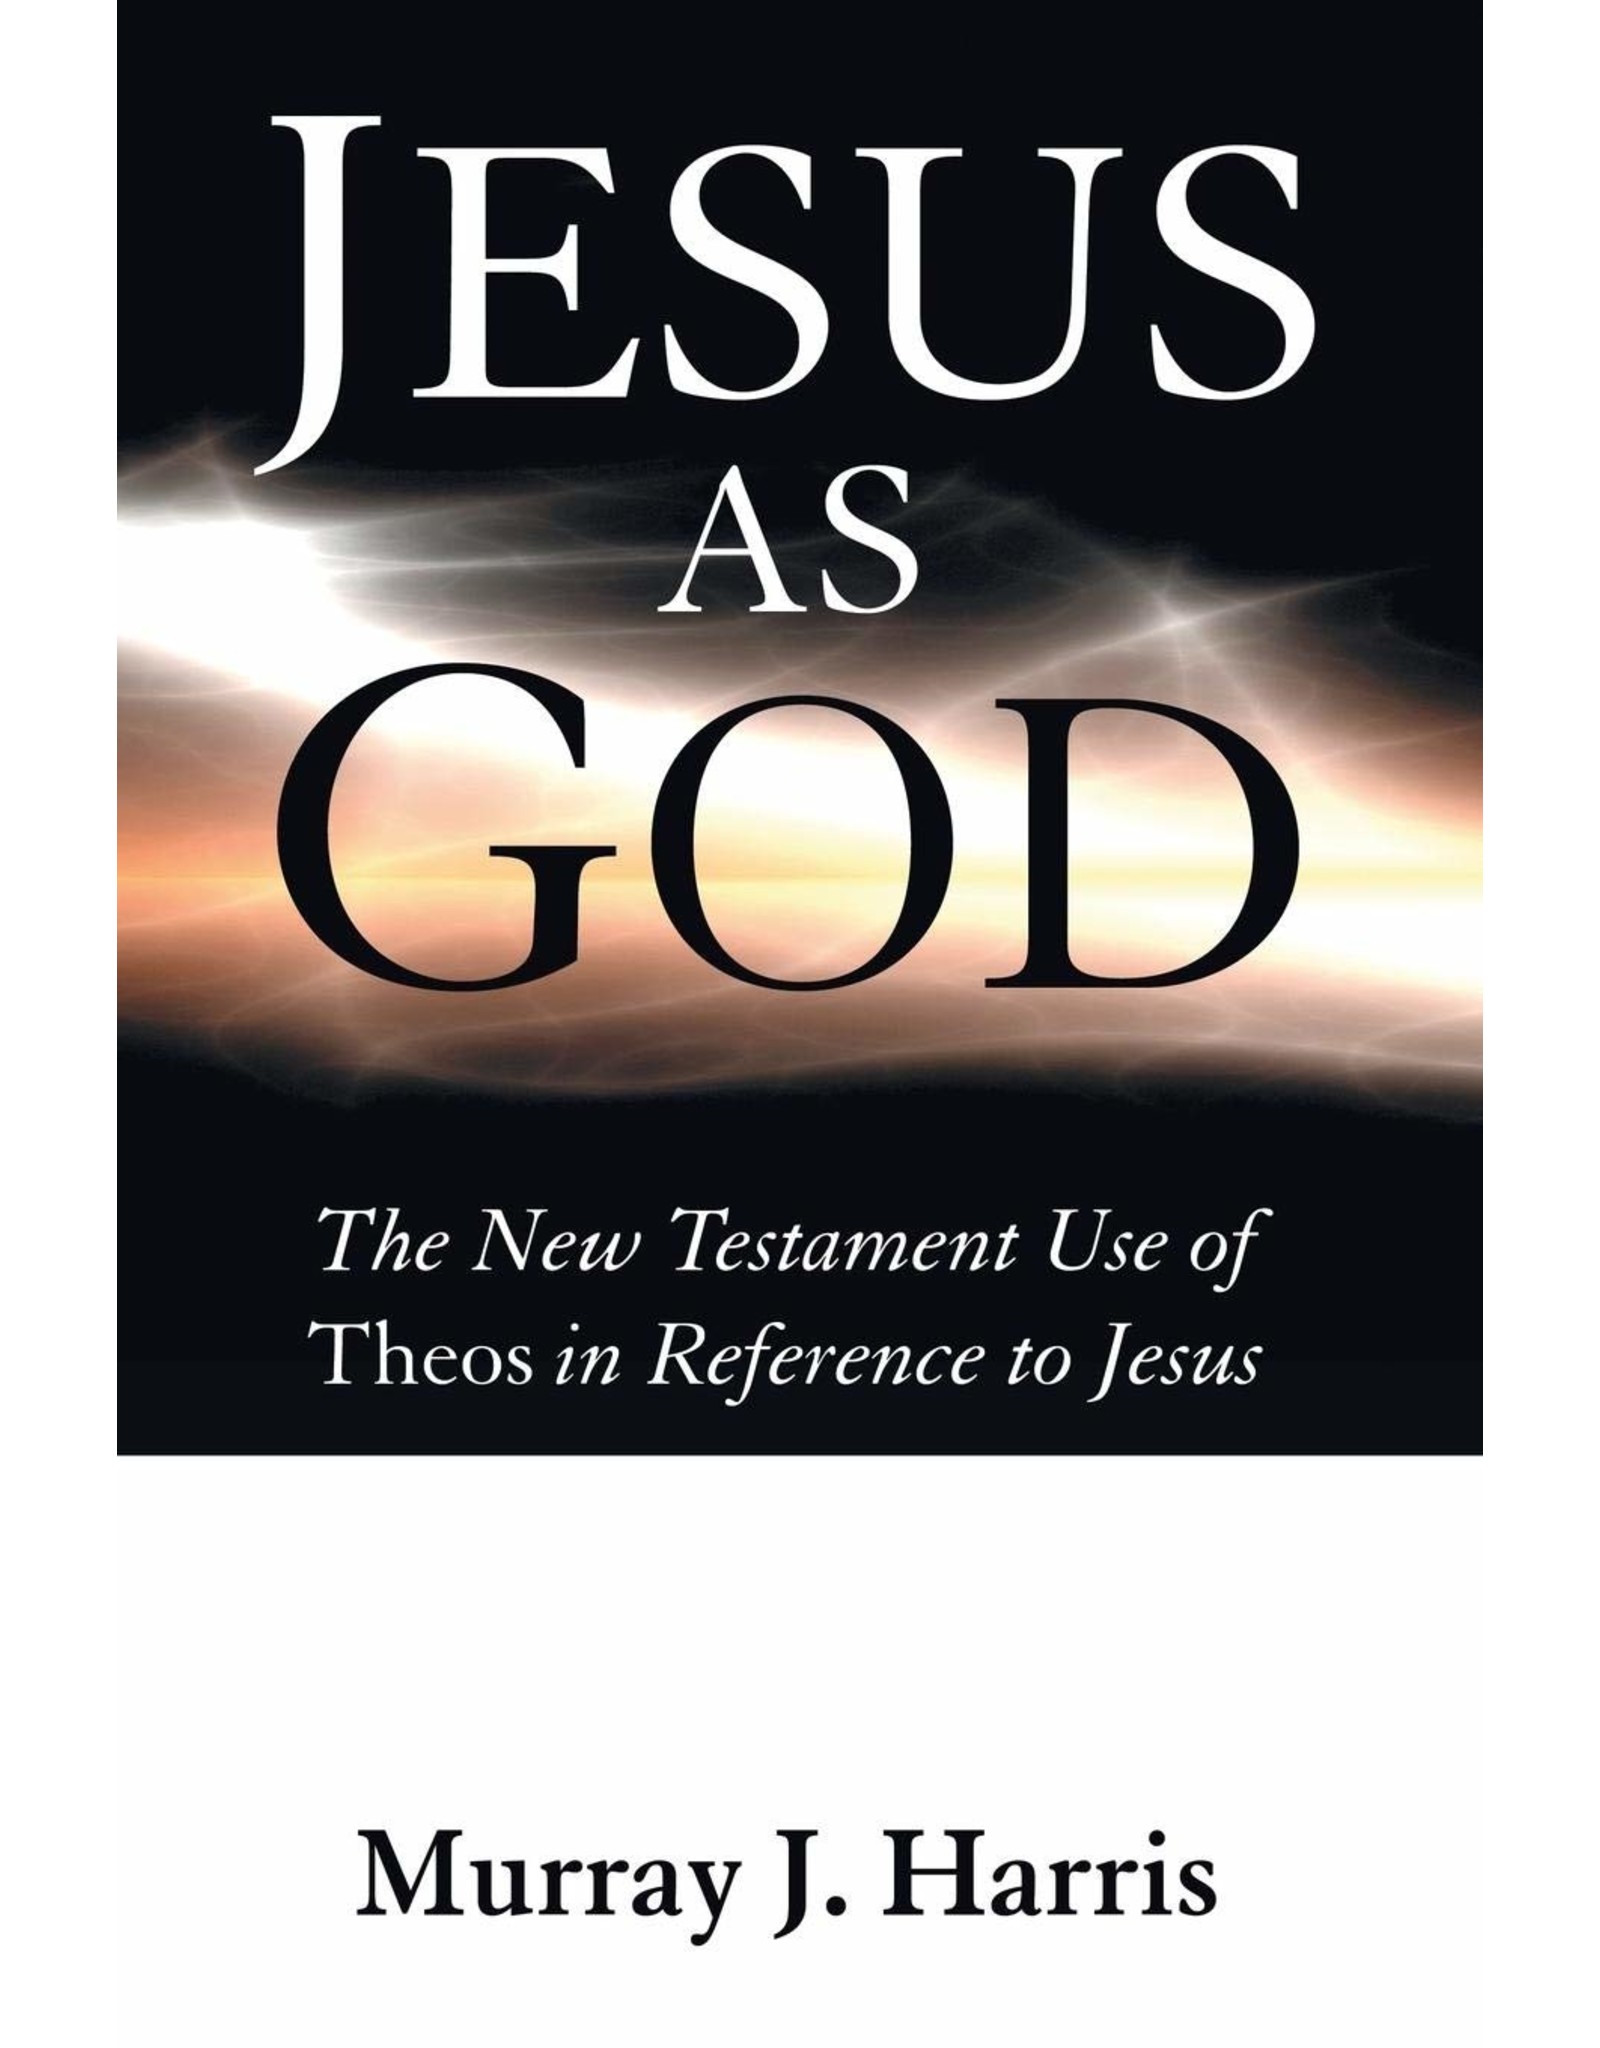 Wipf & Stock Jesus as God: The New Testament Use of Theos in Reference to Jesus